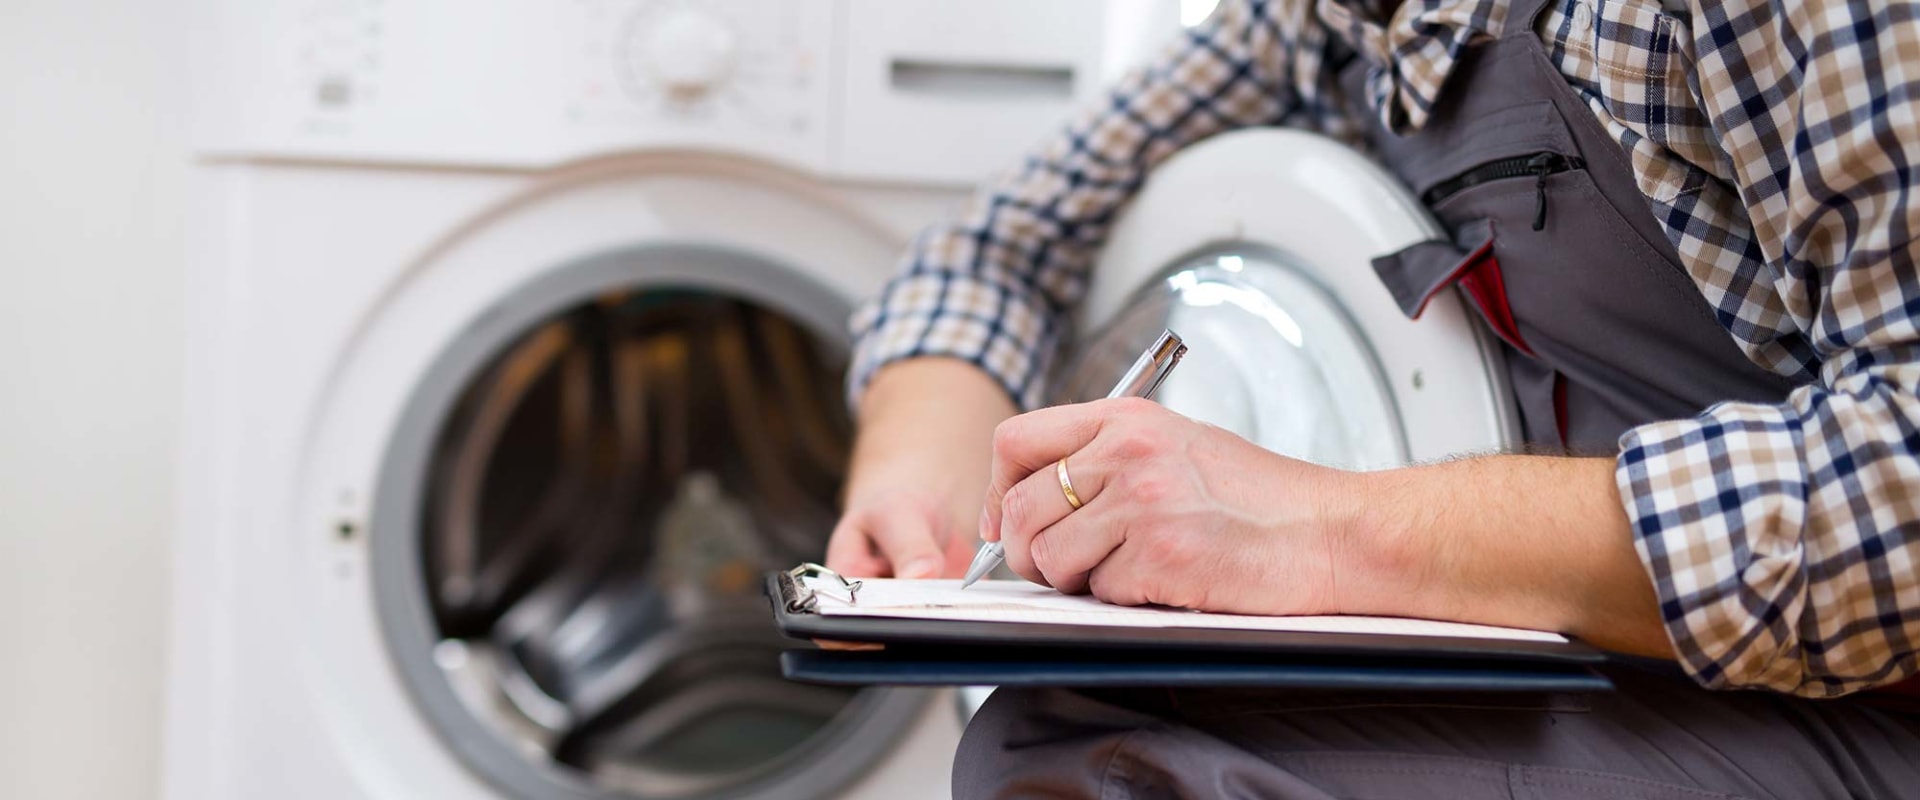 Are Appliance Repair Plans Worth It?